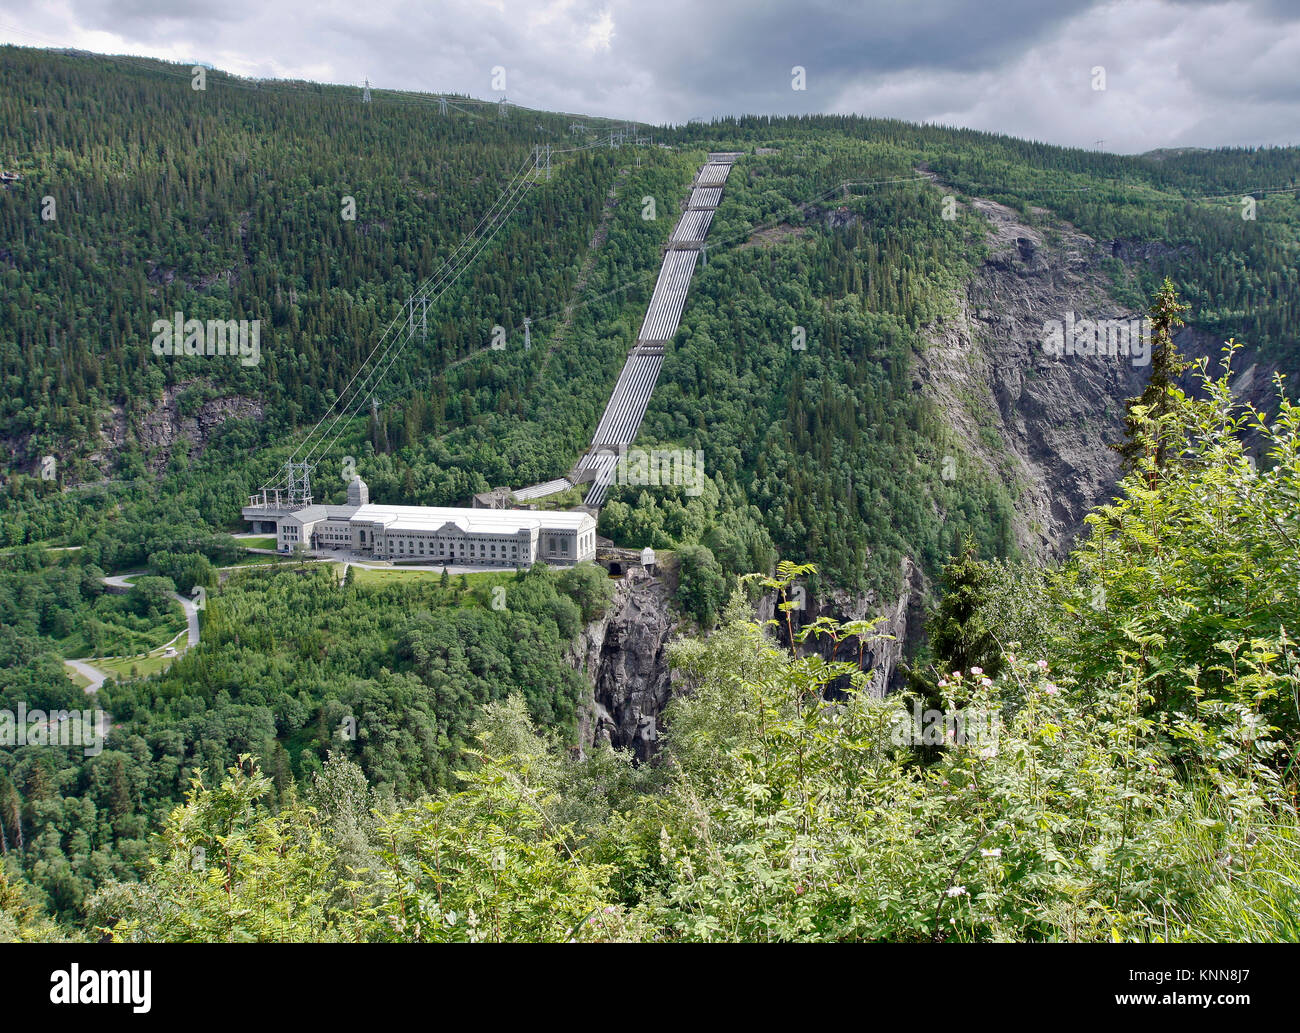 The Vemork Hydroelectric Power Plant in Rjukan, Norway seen from above. First plant to mass-produce heavy water. Museum today. Stock Photo